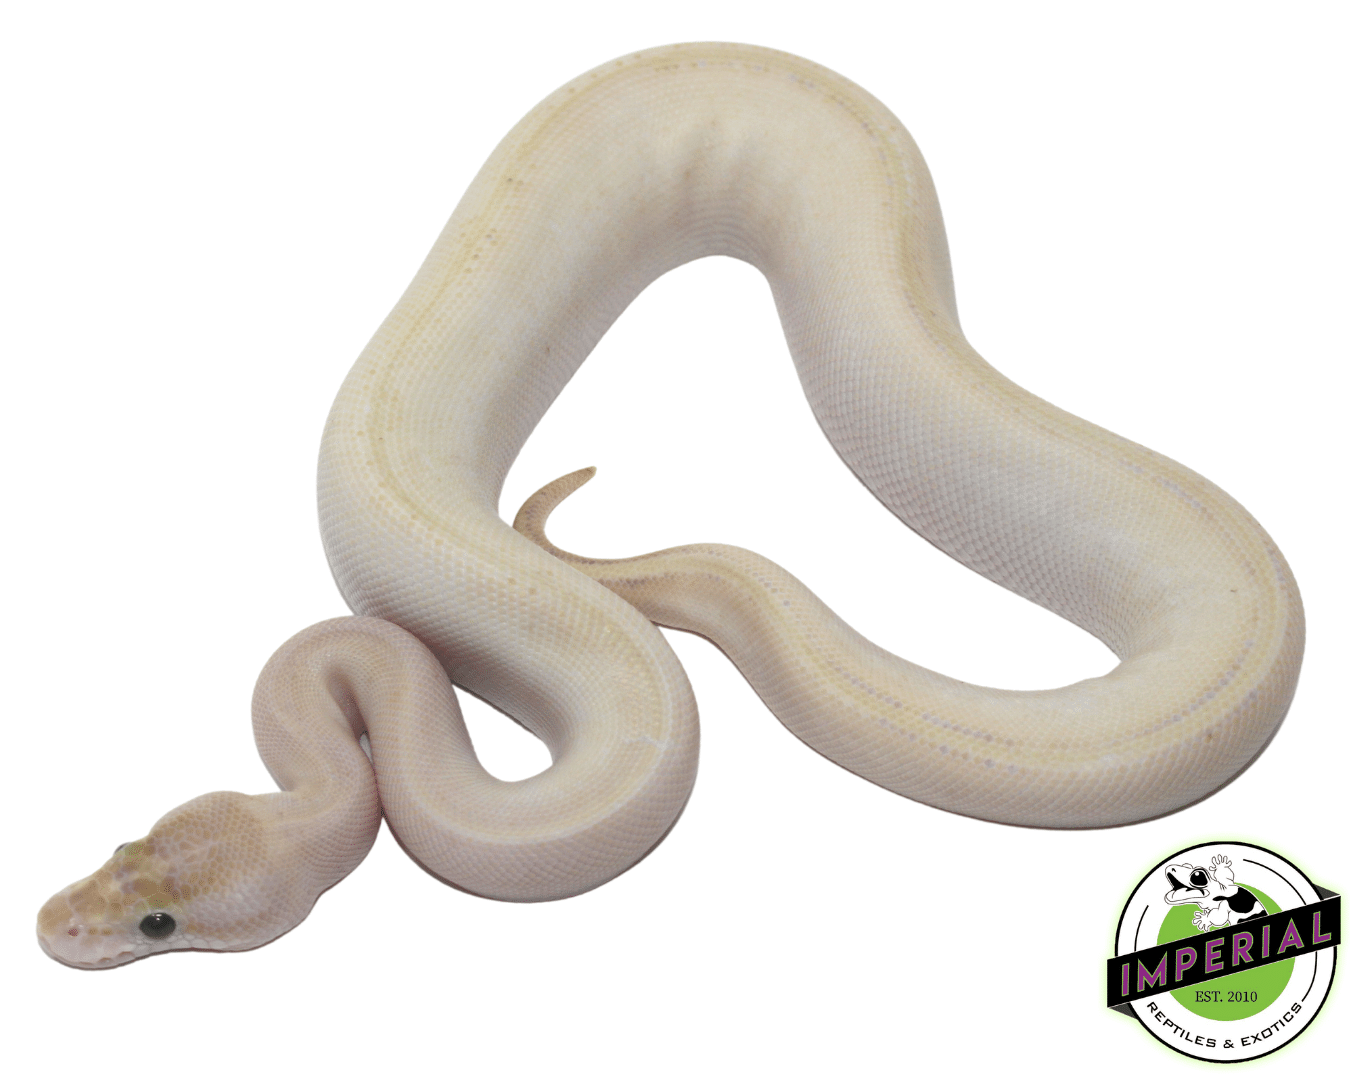 butter ivory genetic stripe ball python for sale, buy reptiles online